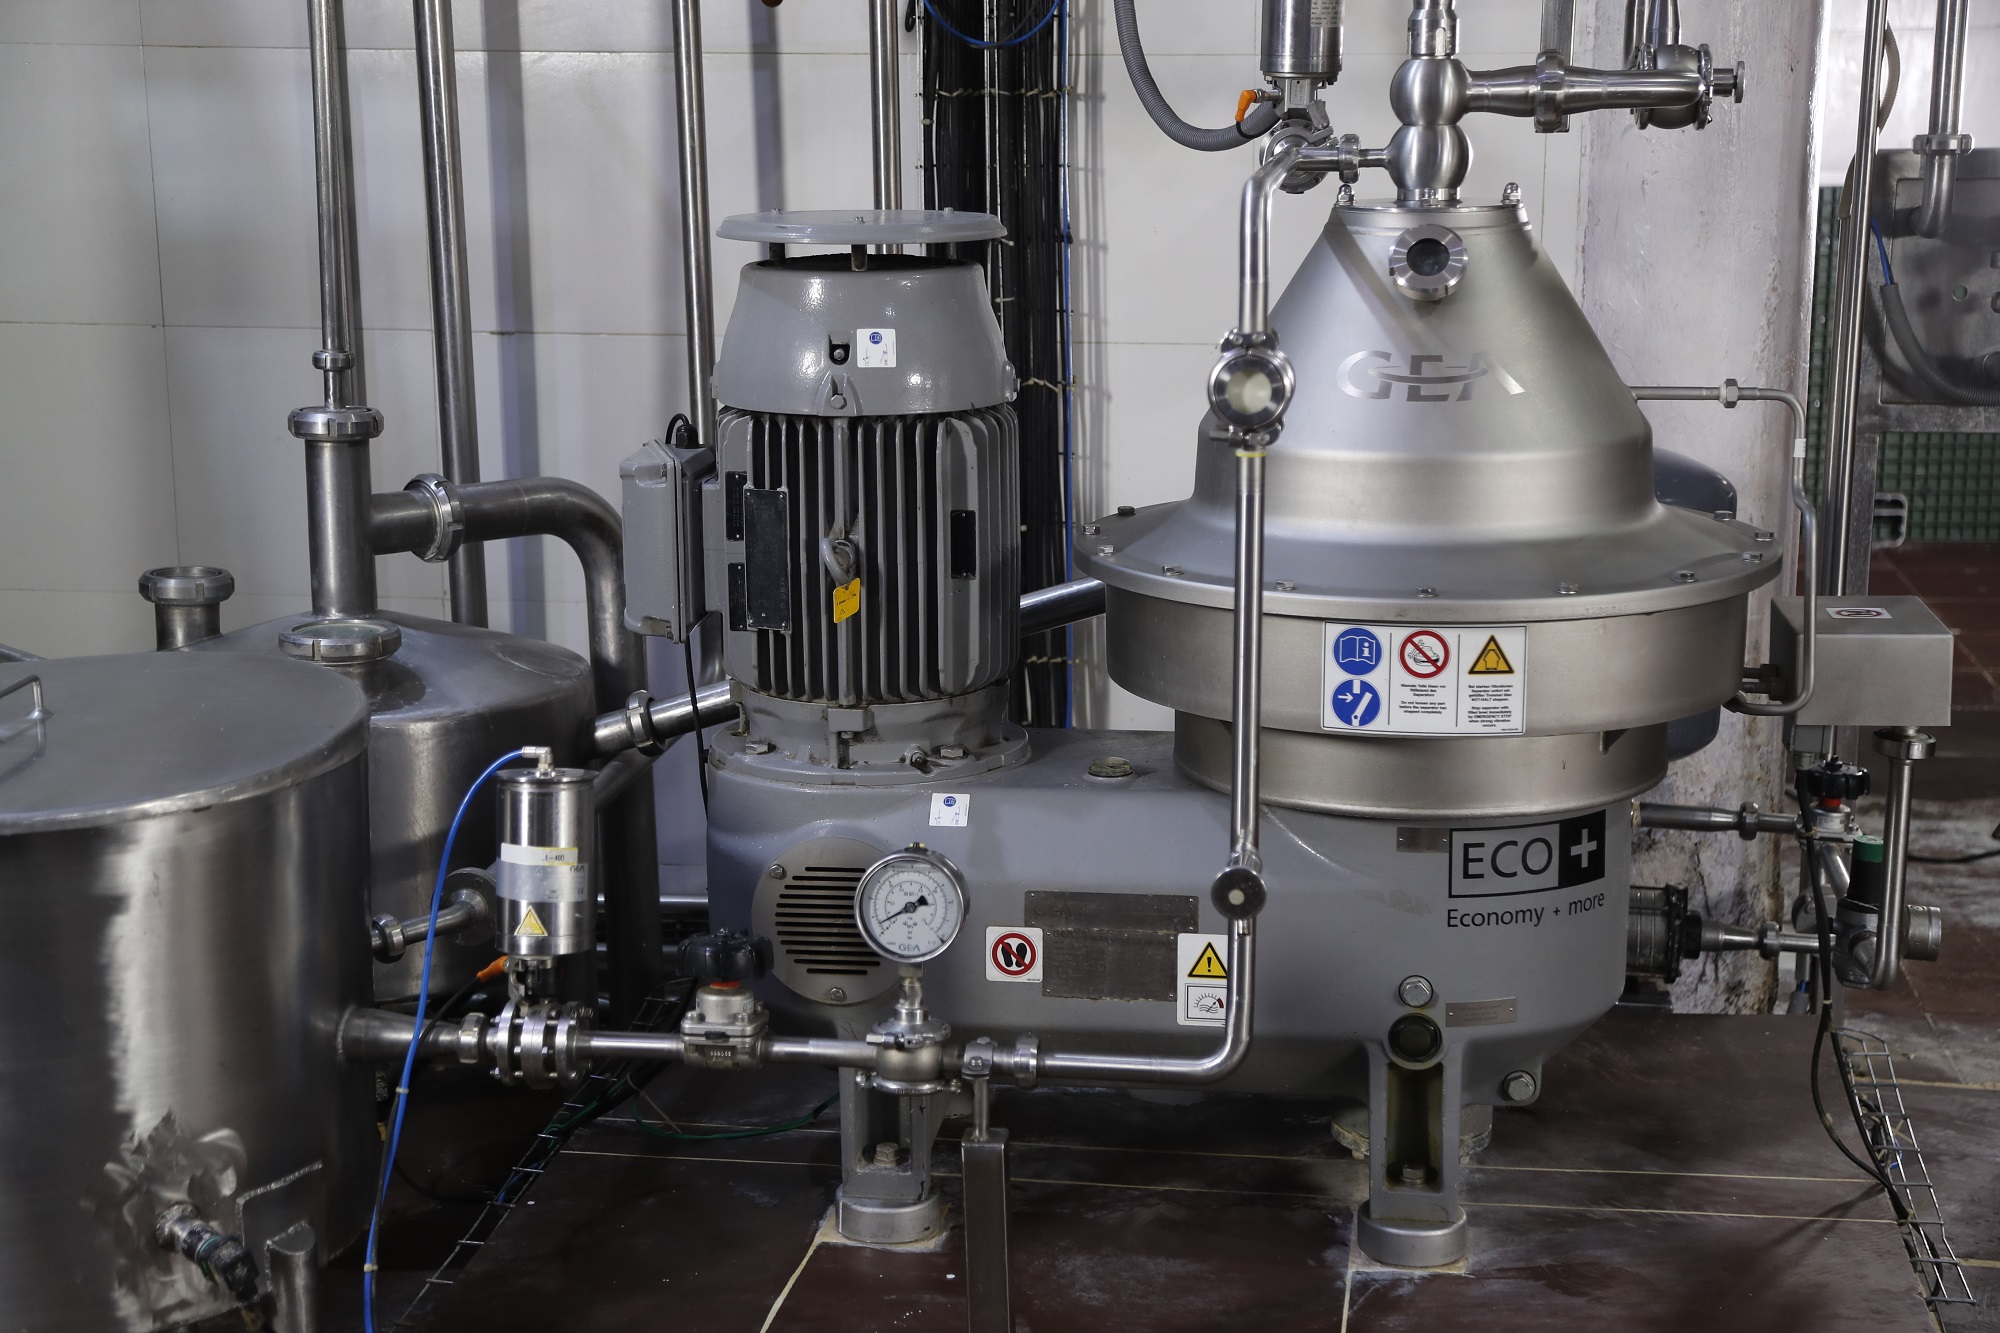 GEA developed its serum separator with a capacity of 3,000 litres per hour based on Amul Dairy’s requirement for the local market. (Image: GEA)